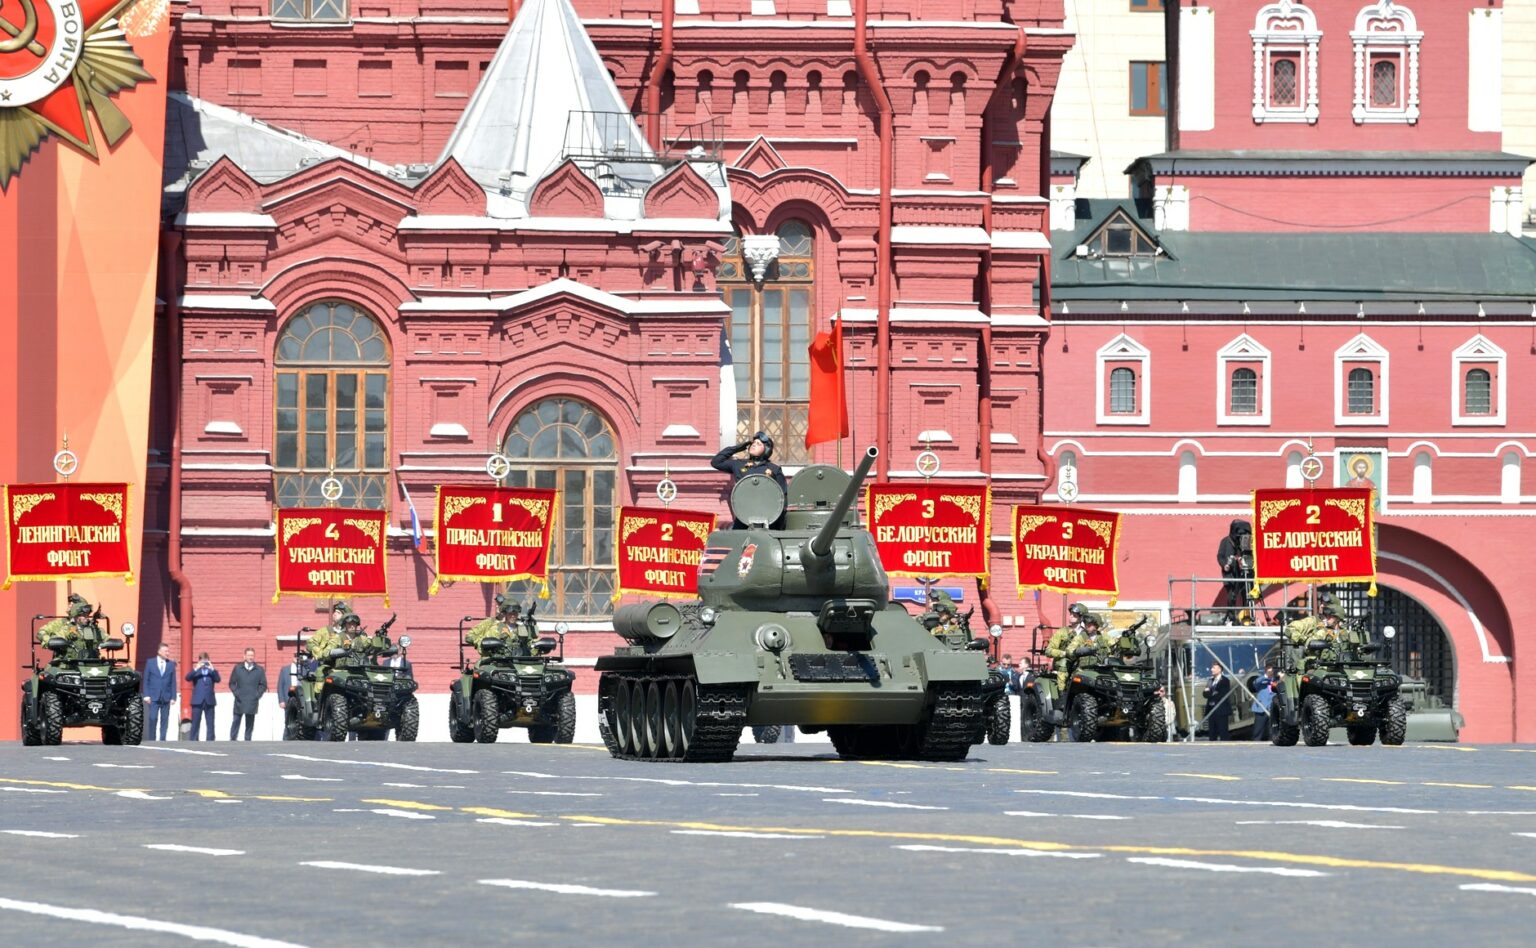 Moscow Victory Day Parade 2018 By kremlin.ru, CC BY 4.0, https://commons.wikimedia.org/w/index.php?curid=68926249